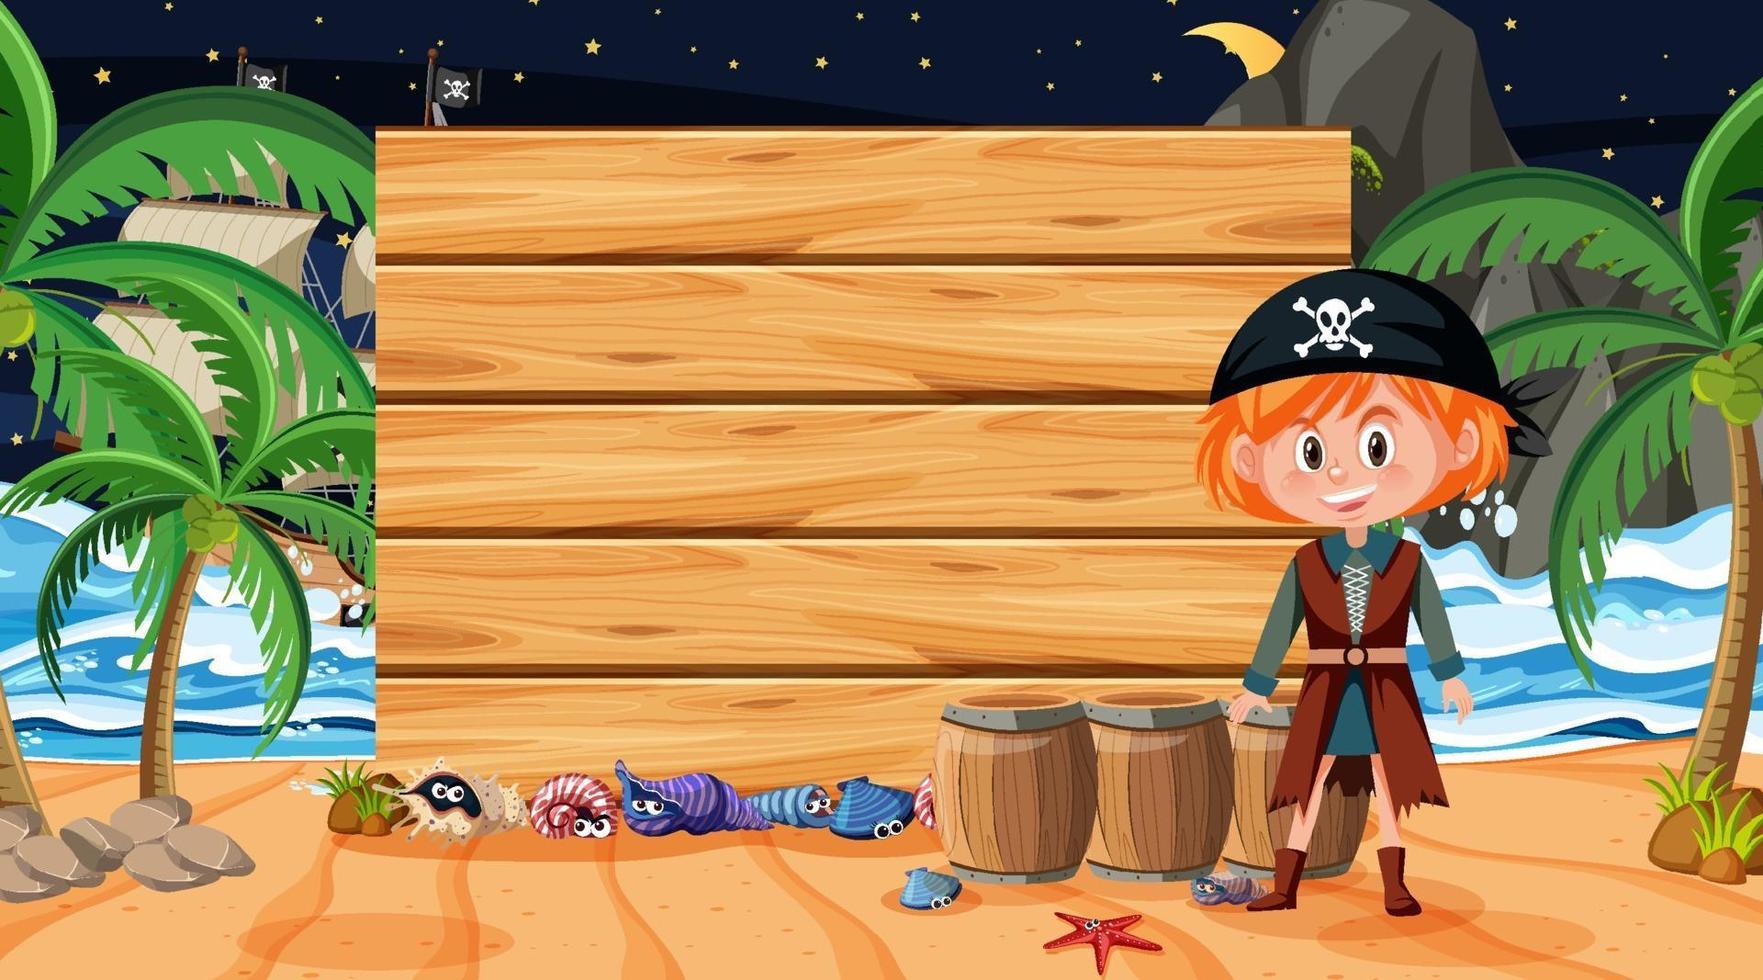 Pirate kids at the beach night scene with an empty banner template vector